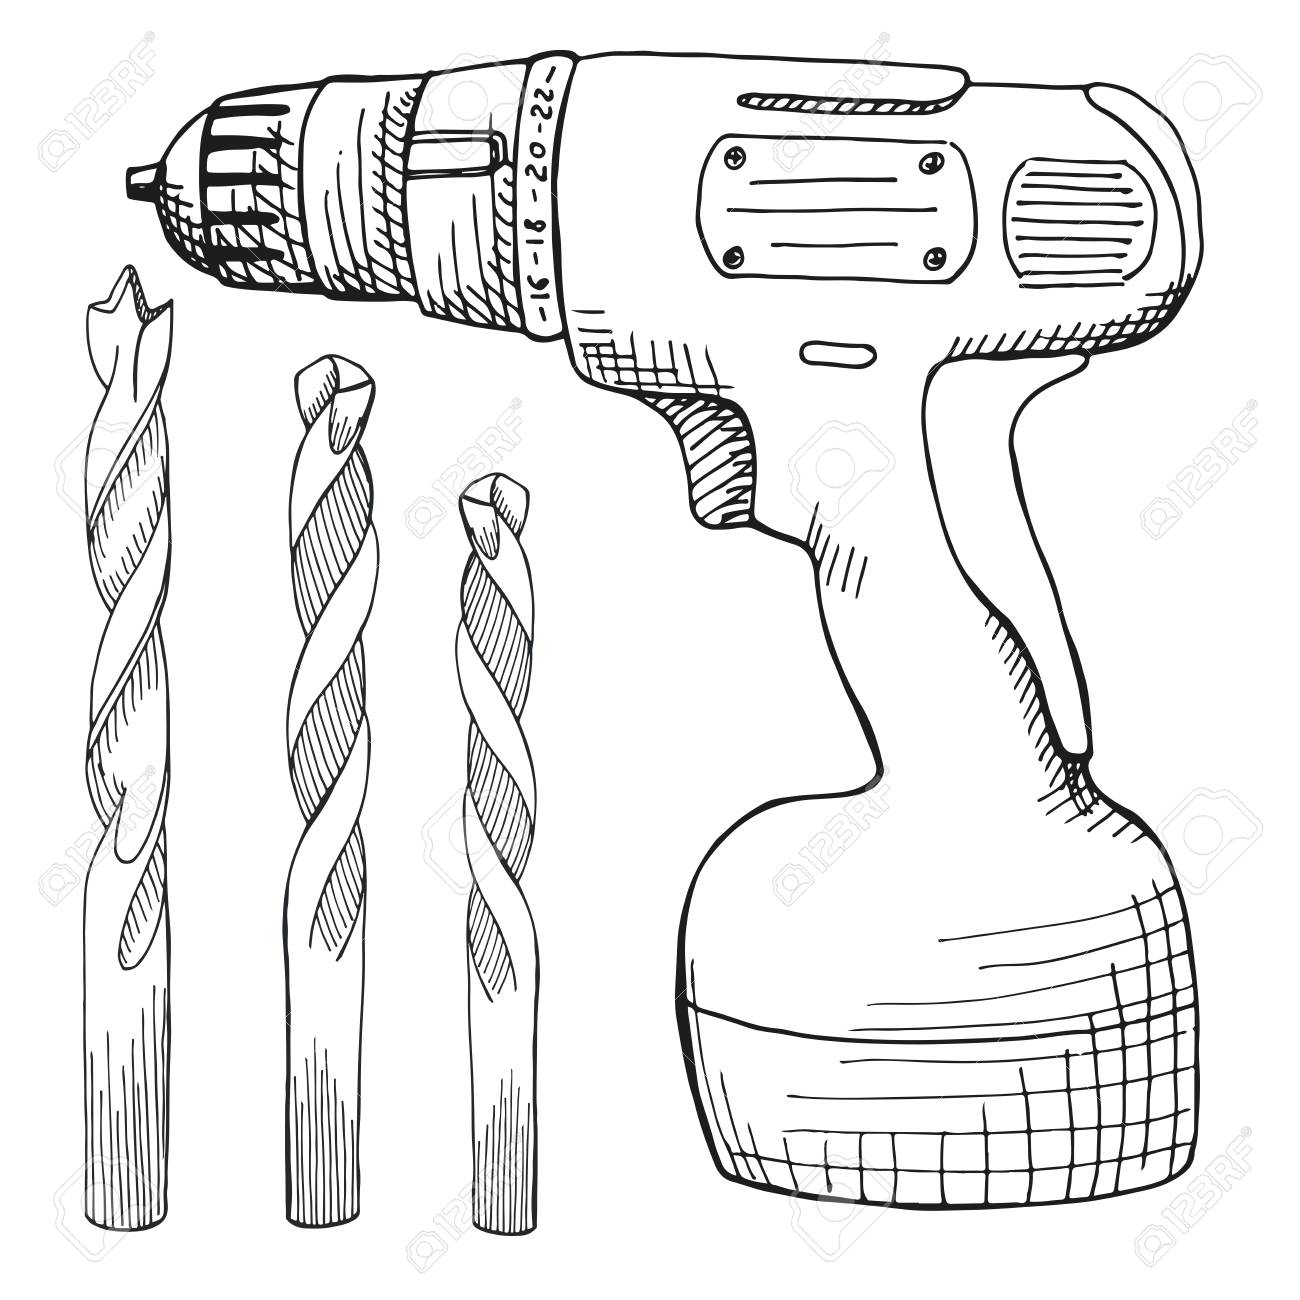 The best free Drill drawing images. Download from 116 free drawings of